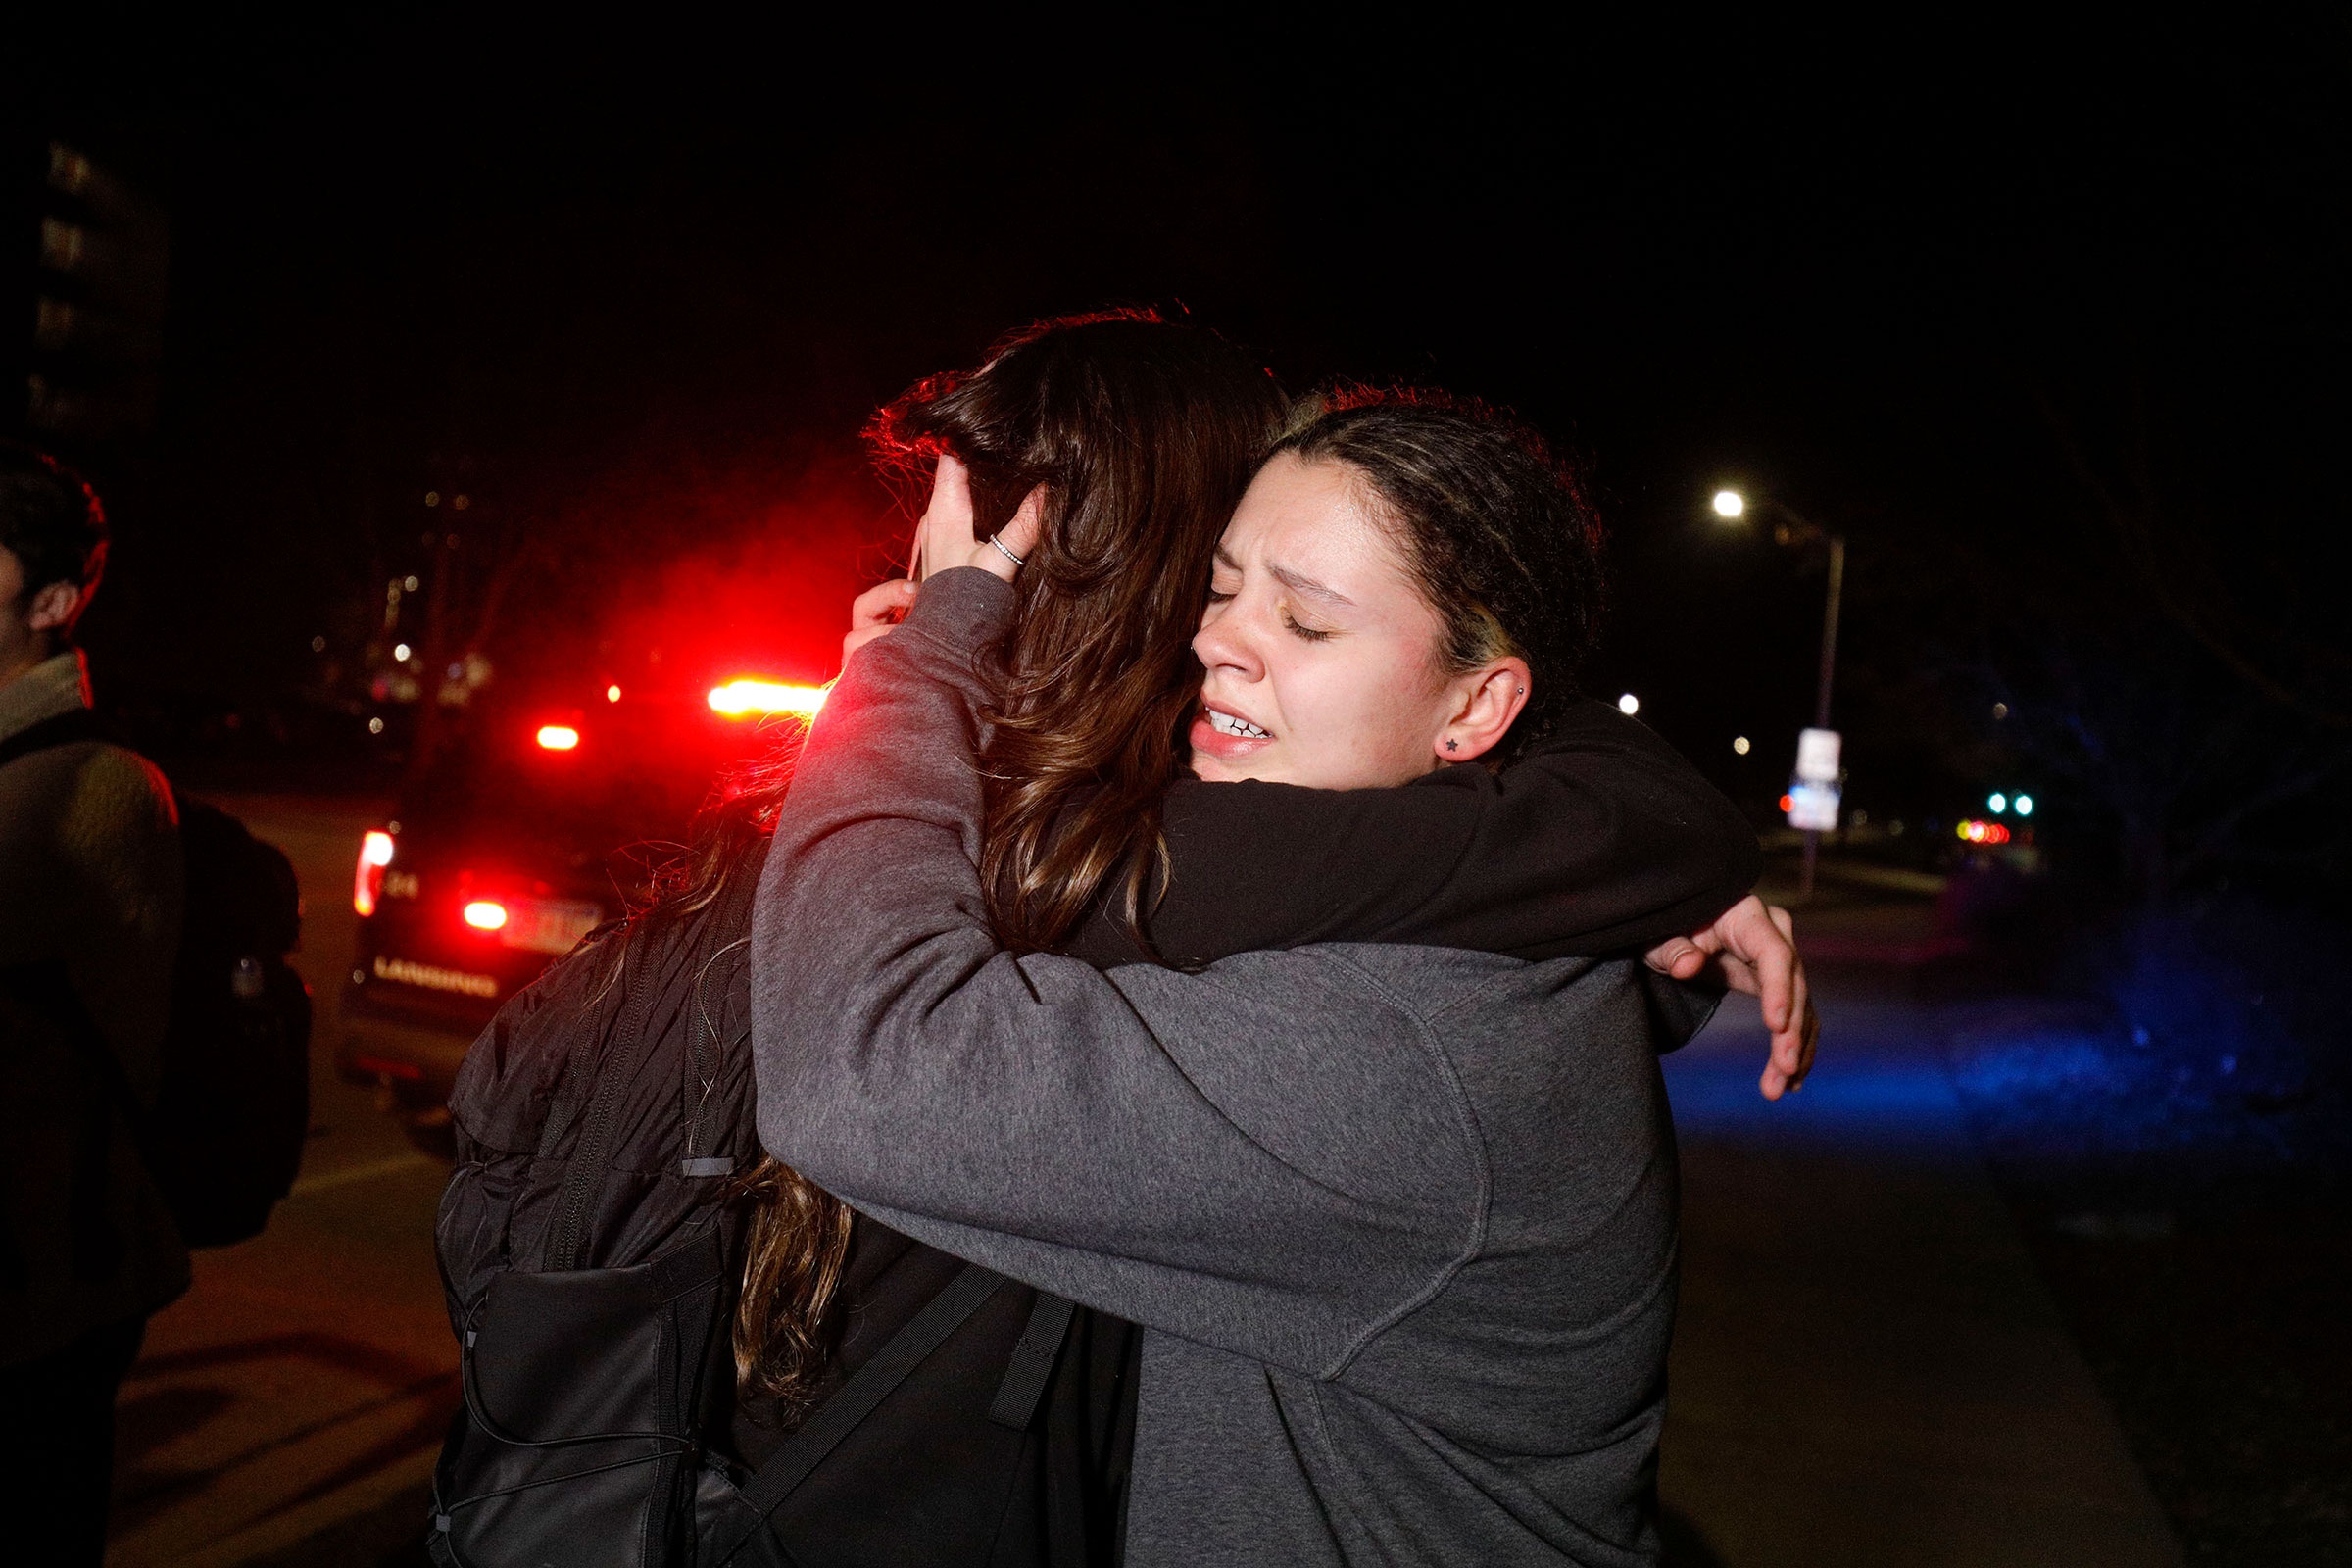 Michigan State University students hug during an active shooter situation on campus in Lansing, on Feb. 13, 2023. (Bill Pugliano—Getty Images)